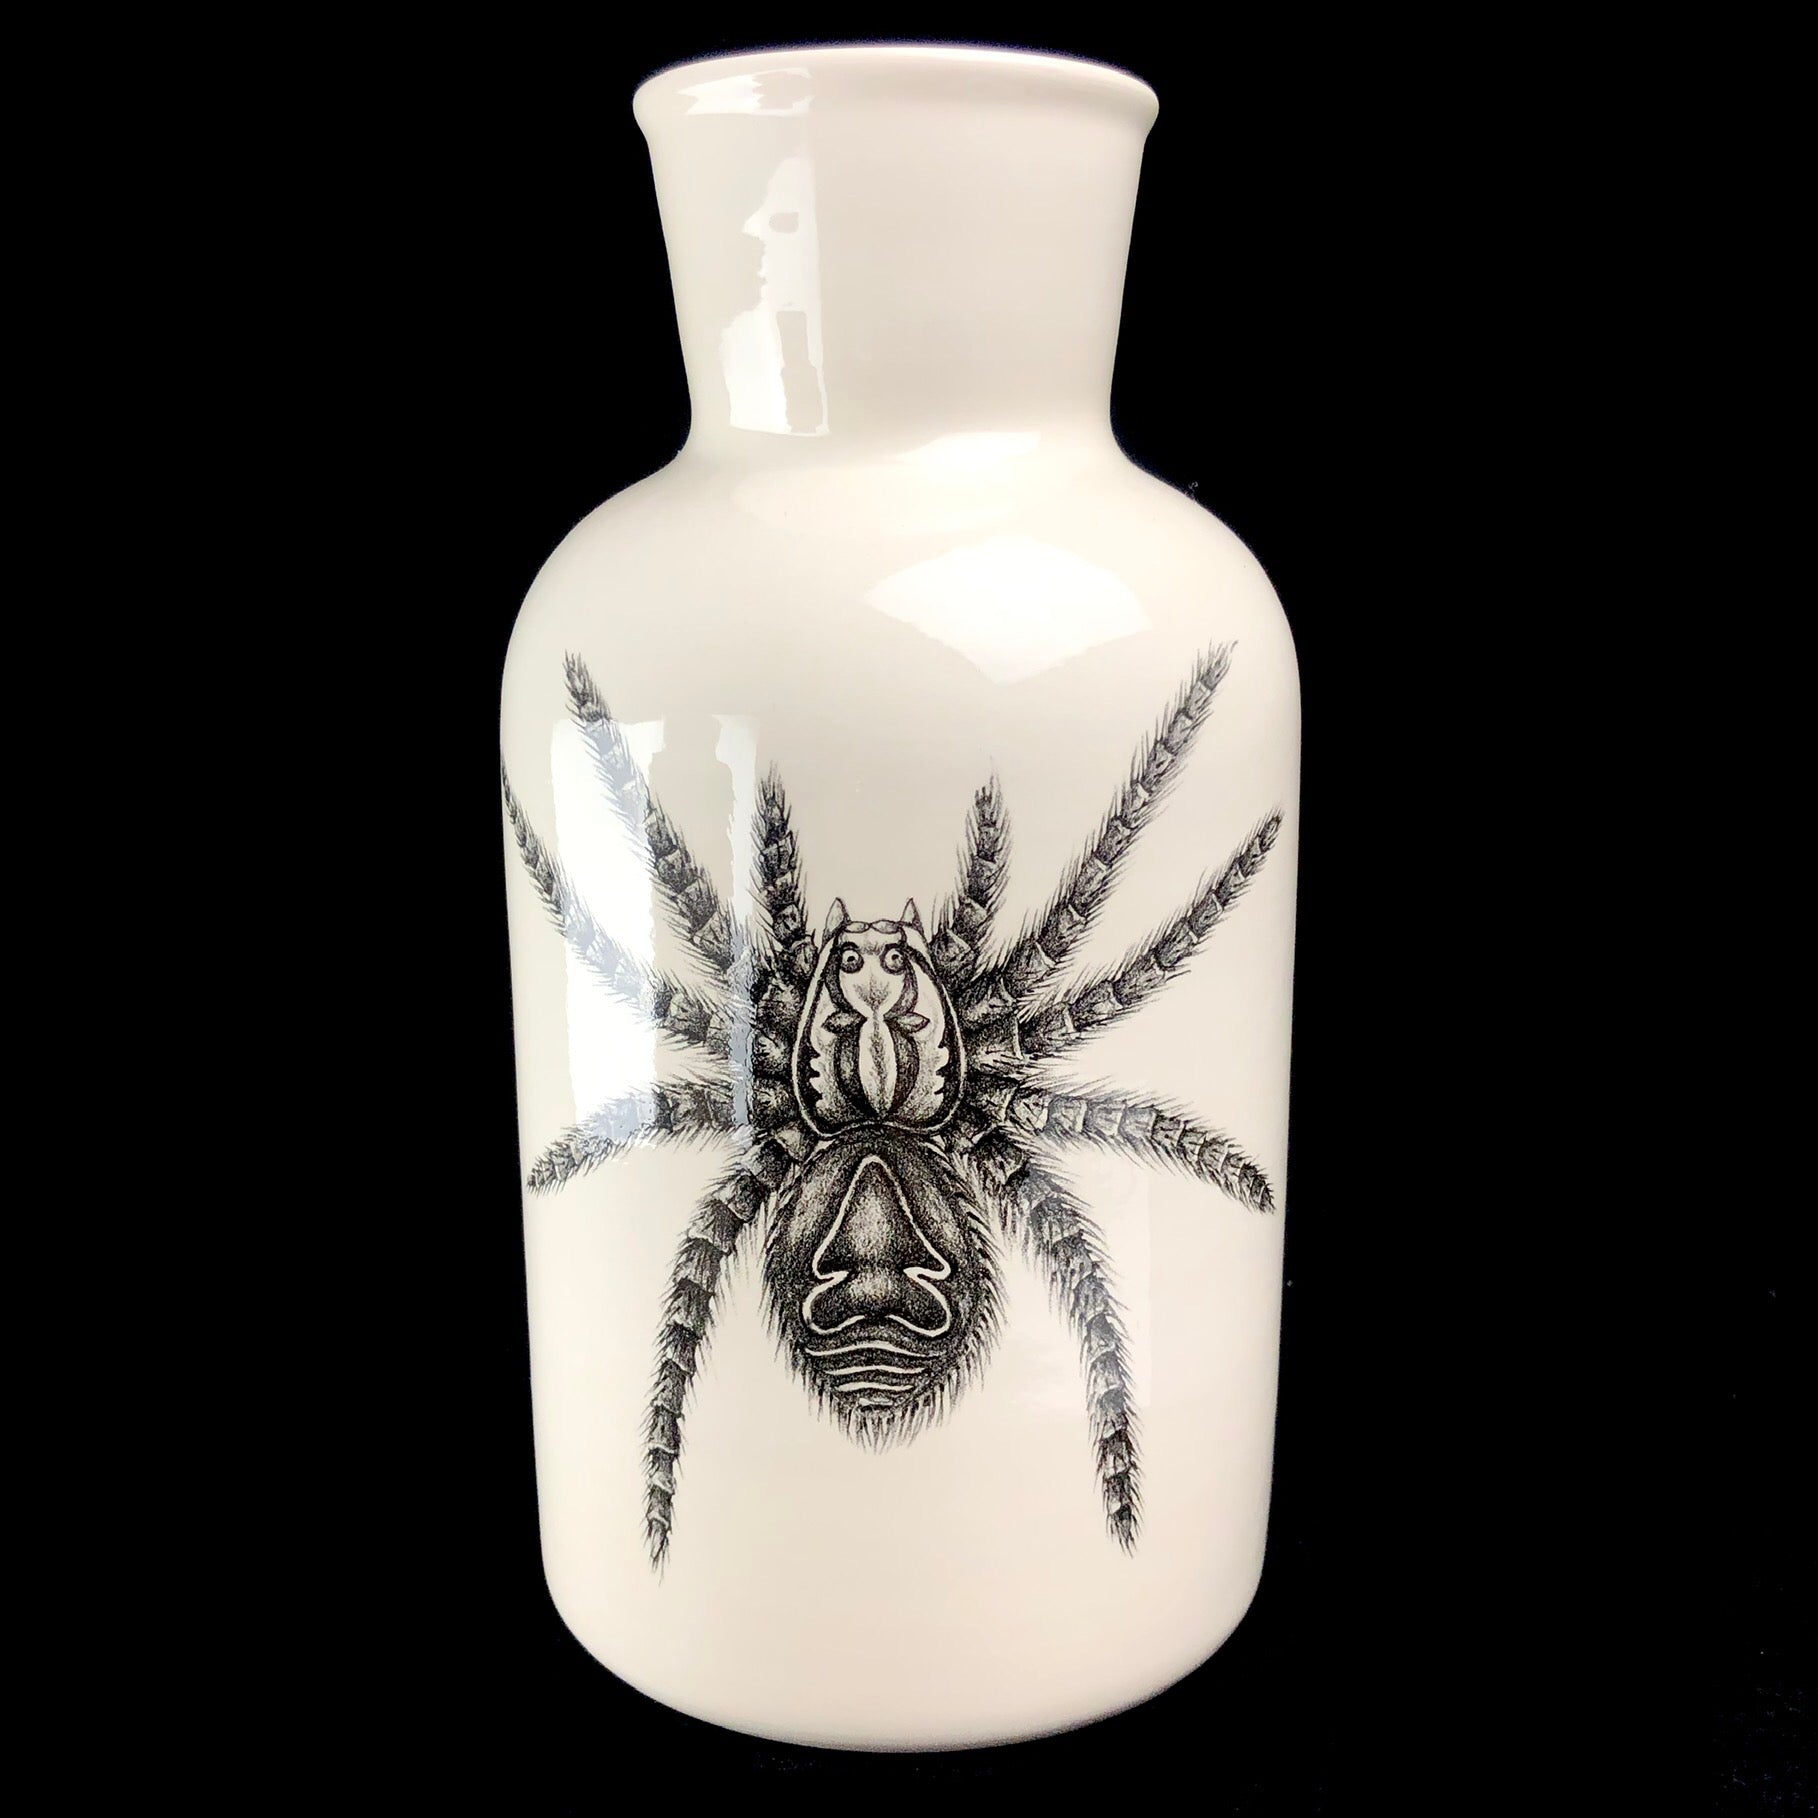 White vase with black drawing of tarantula covering its front